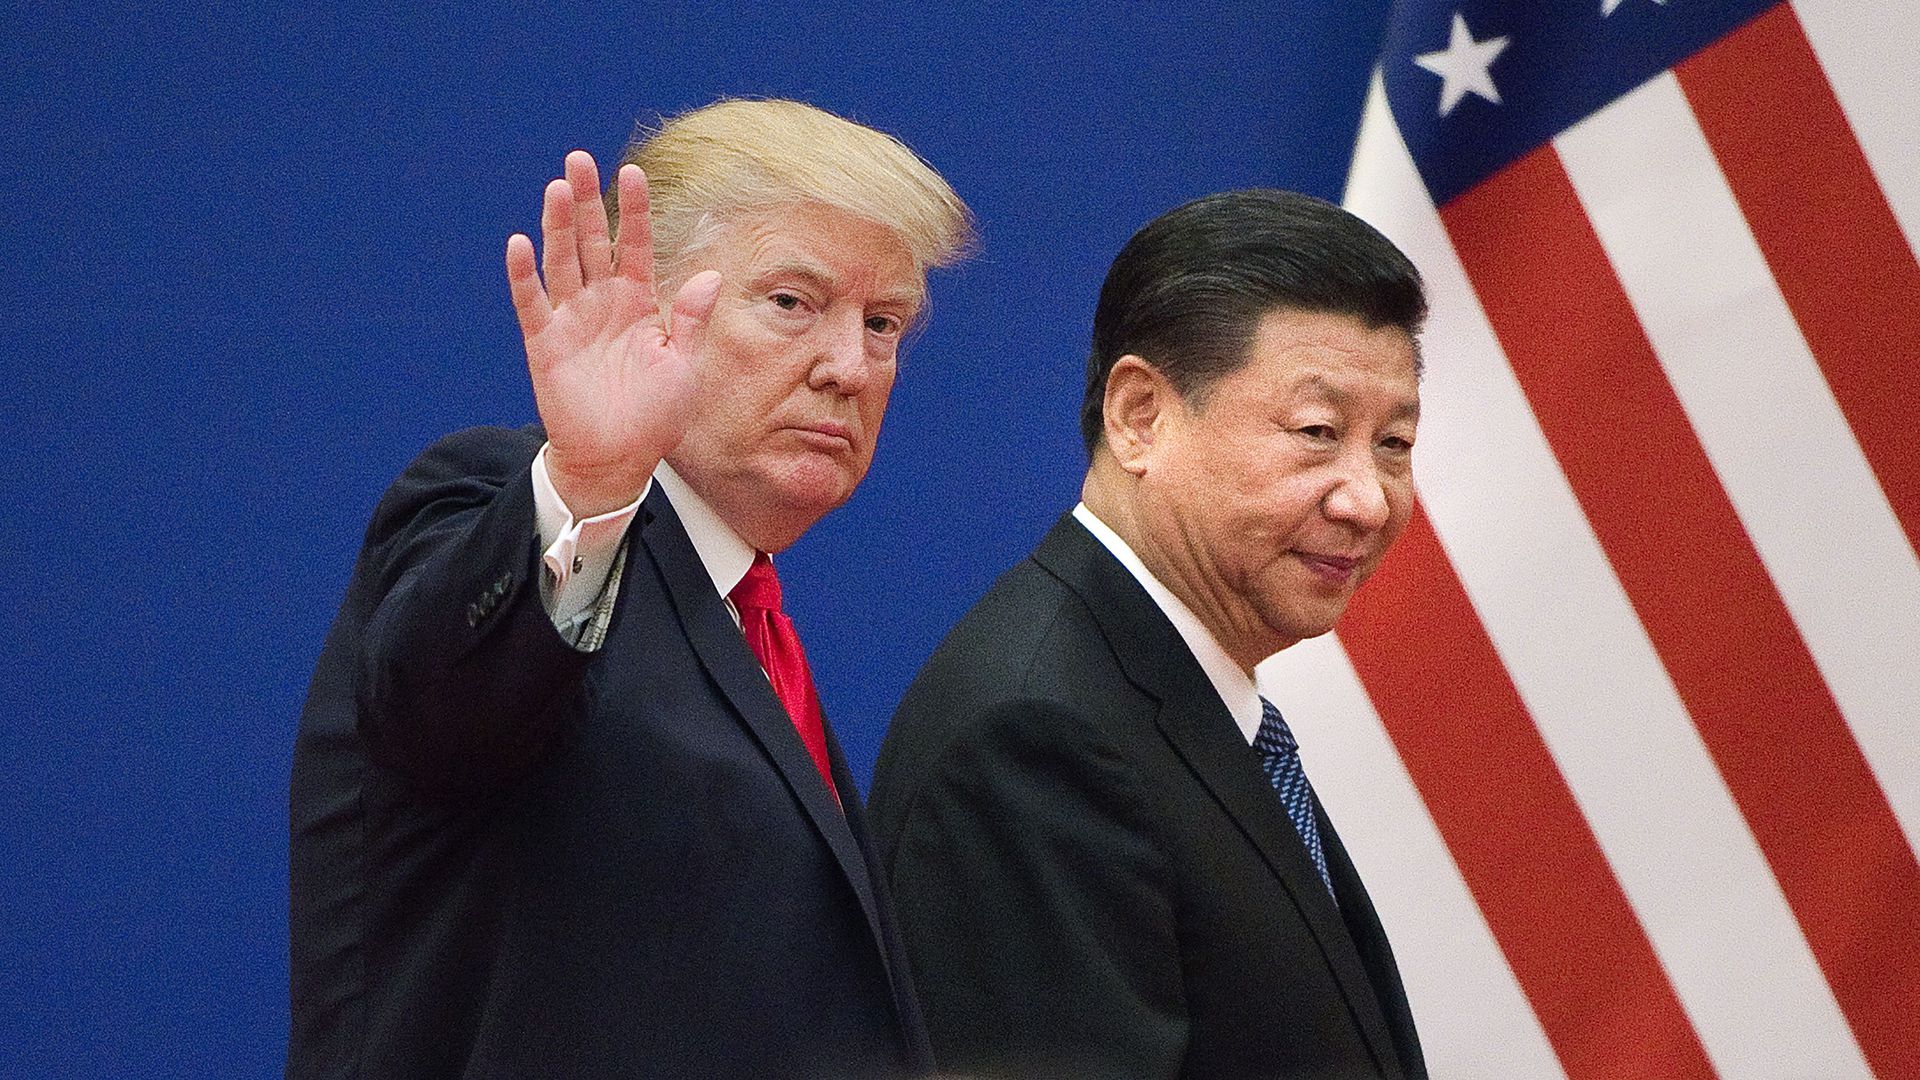 Trump indicated towards a deal with China to end the Trade War